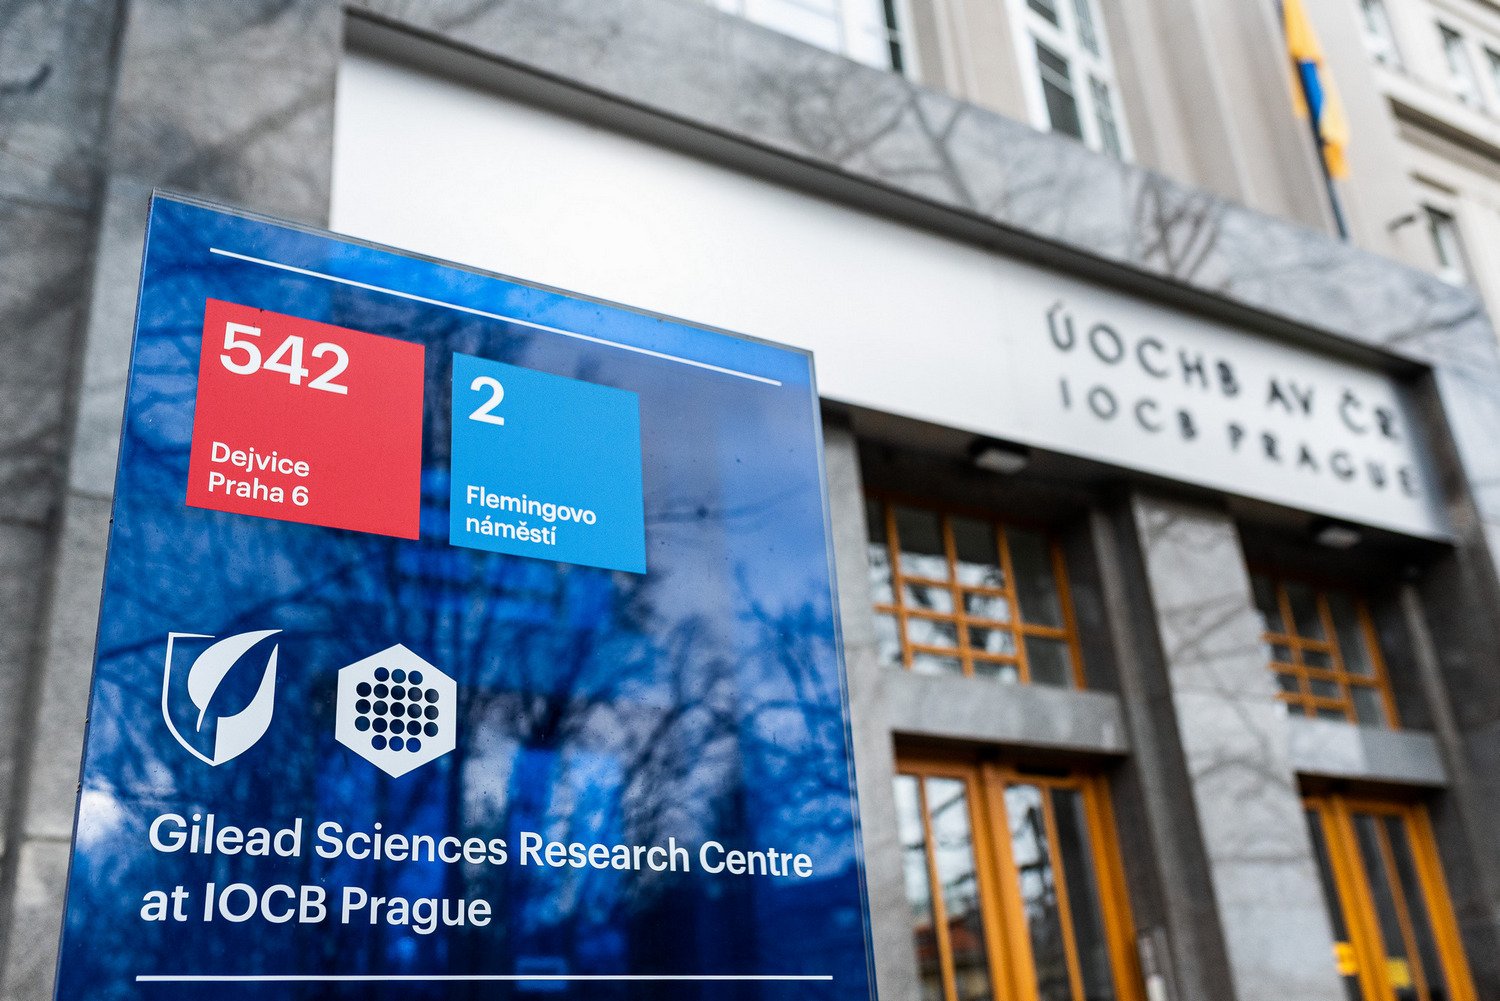 Gilead Sciences Research Centre at IOCB Prague renewed